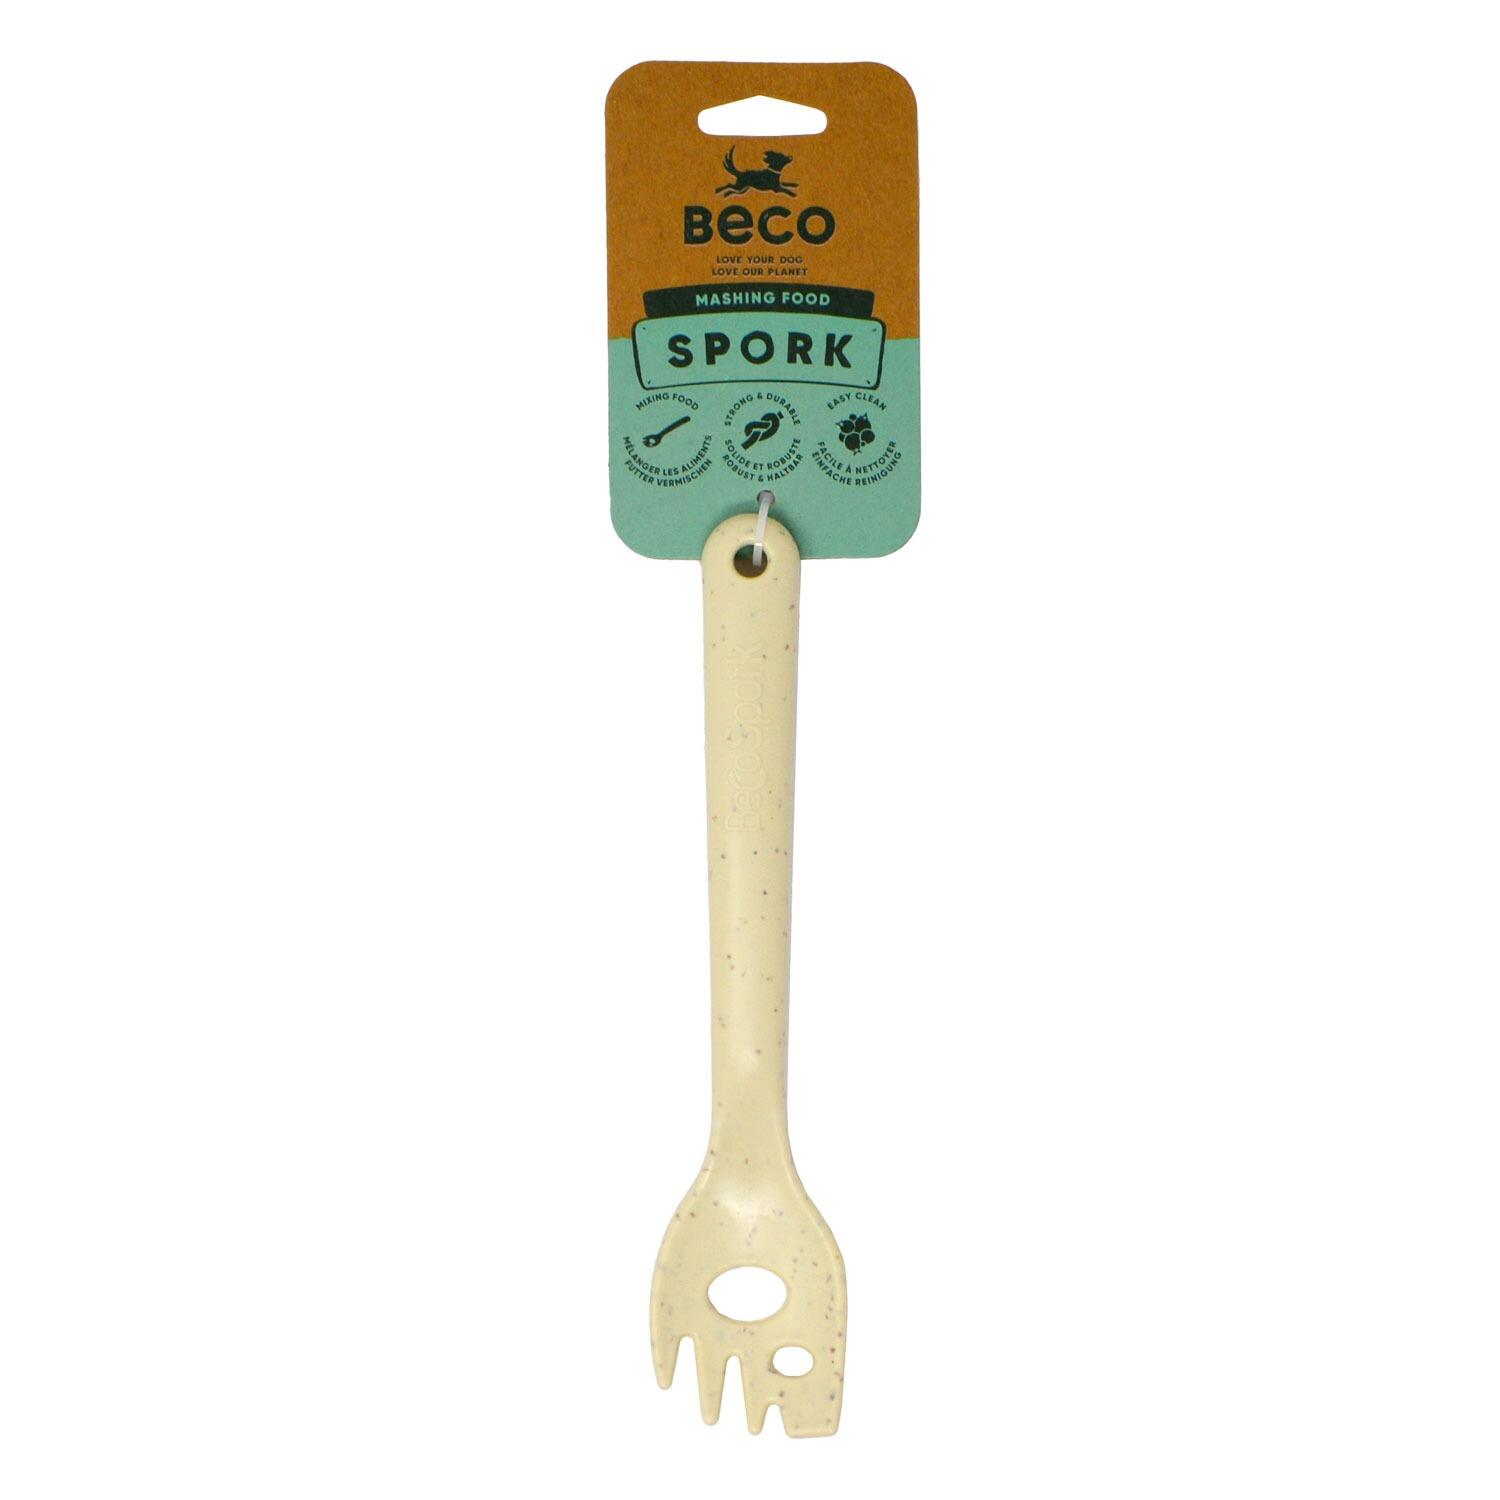 A Food Mashing Pet Spork from Beco